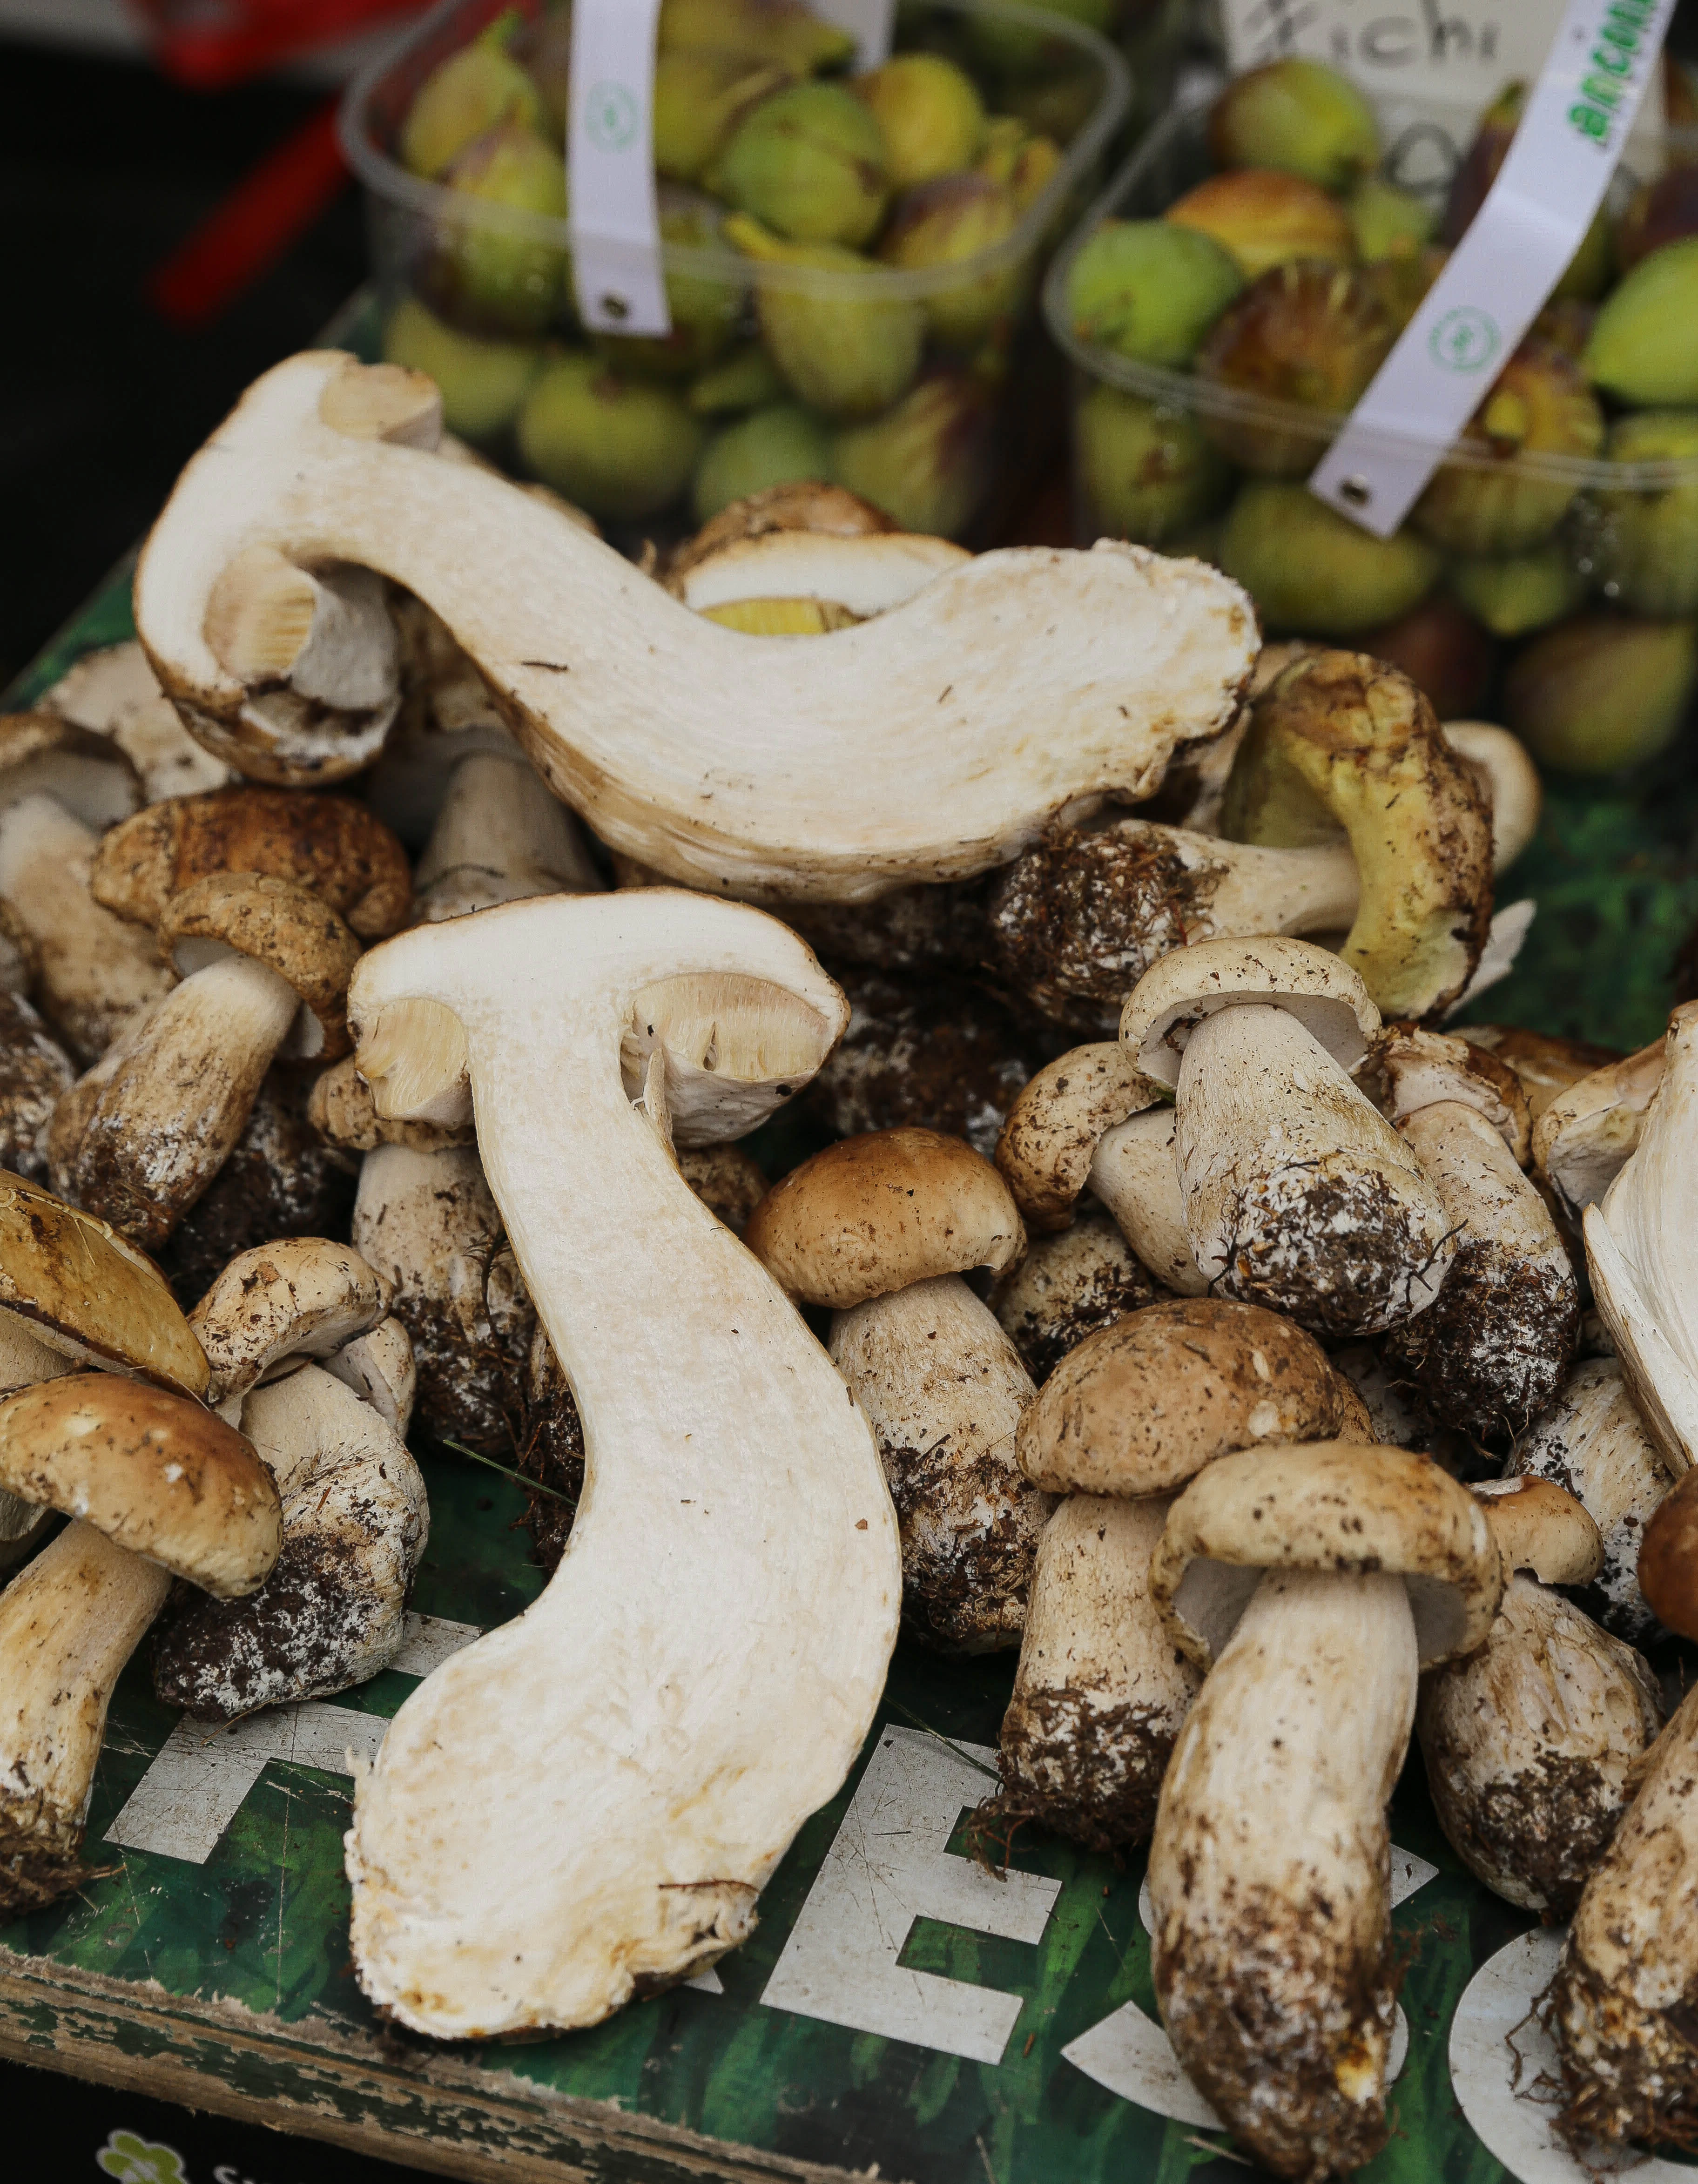 A large mushrooms has been sliced in half and placed on top of a crate of smaller mushrooms.